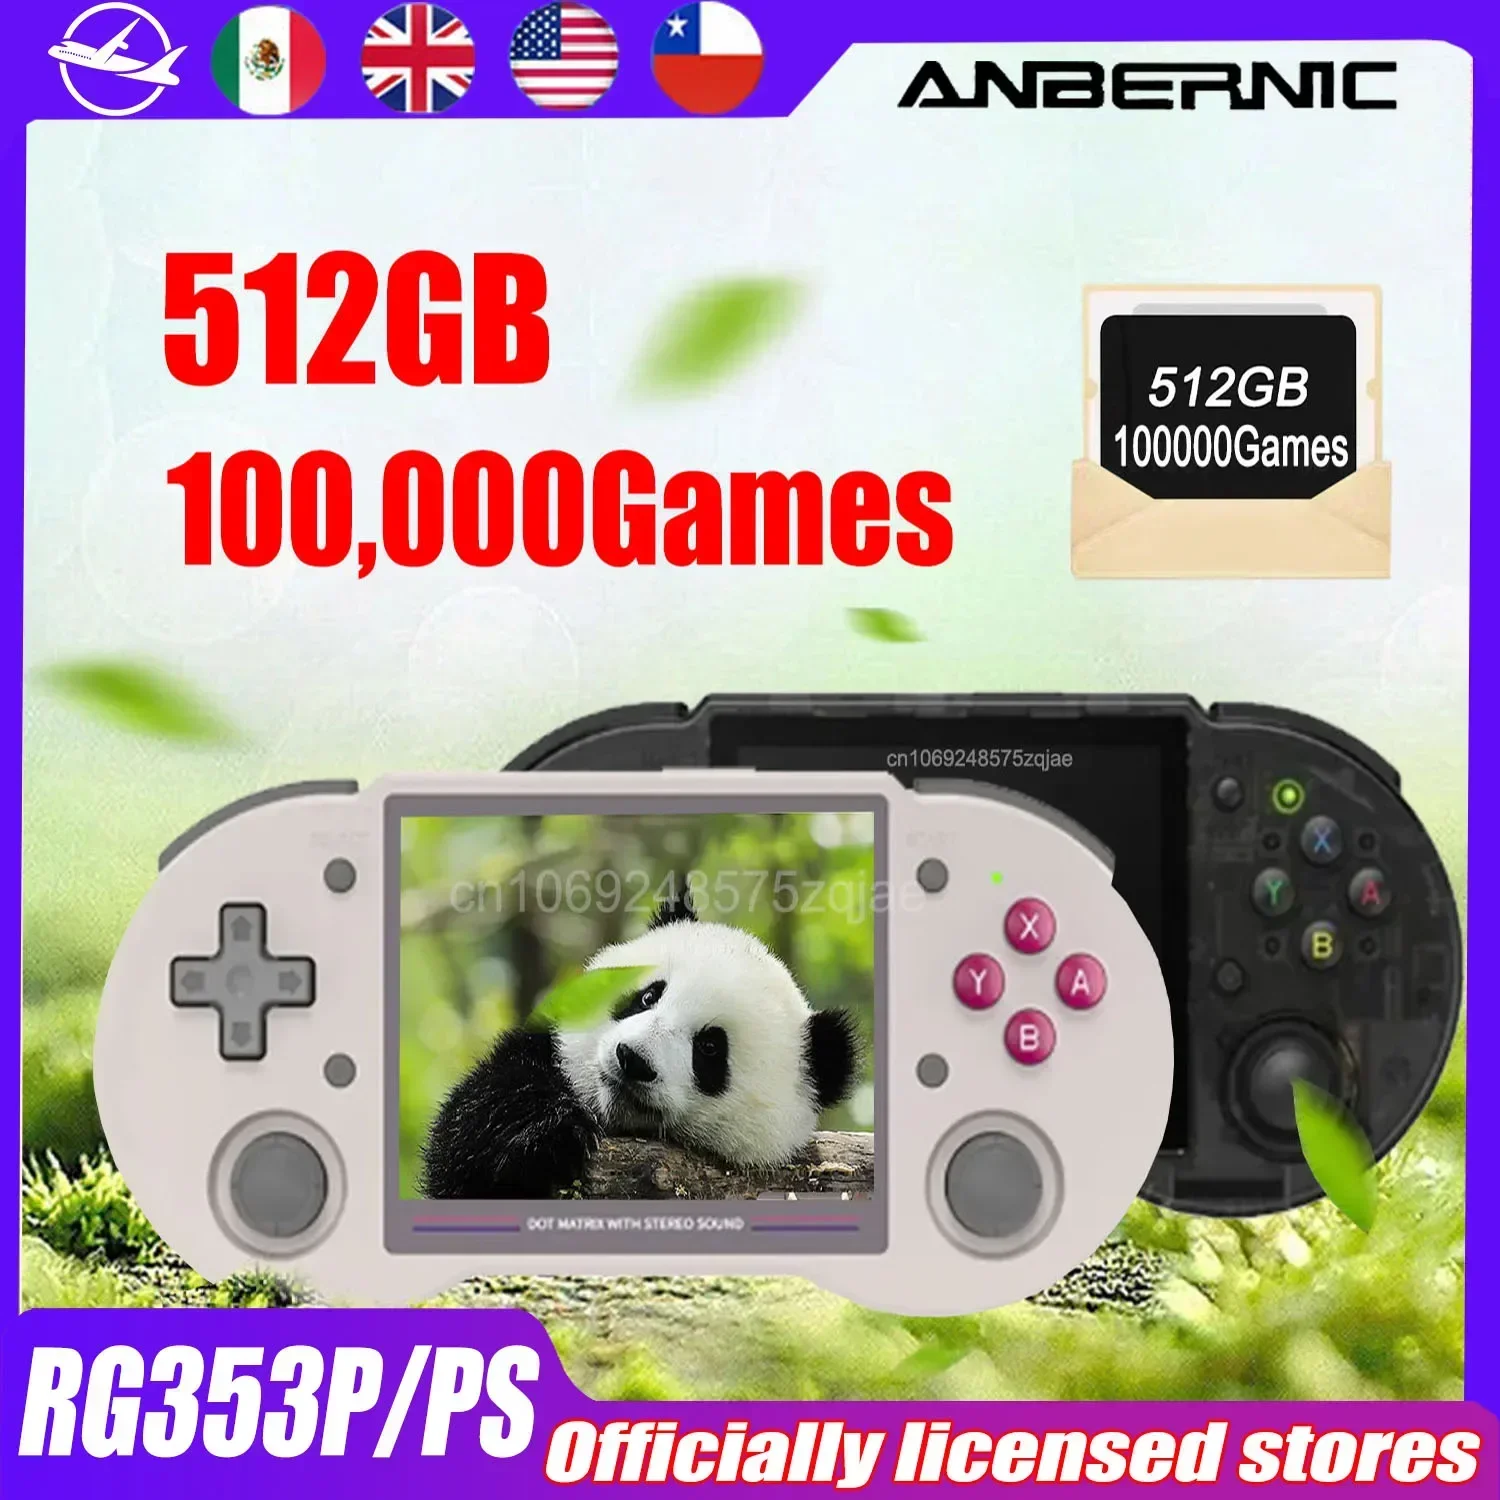 

ANBERNIC RG353PS Retro Handheld Game Console 353P RK3566 3.5 INCH IPS LINUX WIFI/Bluetooth Video Games 512G 100000 Games PSP 450